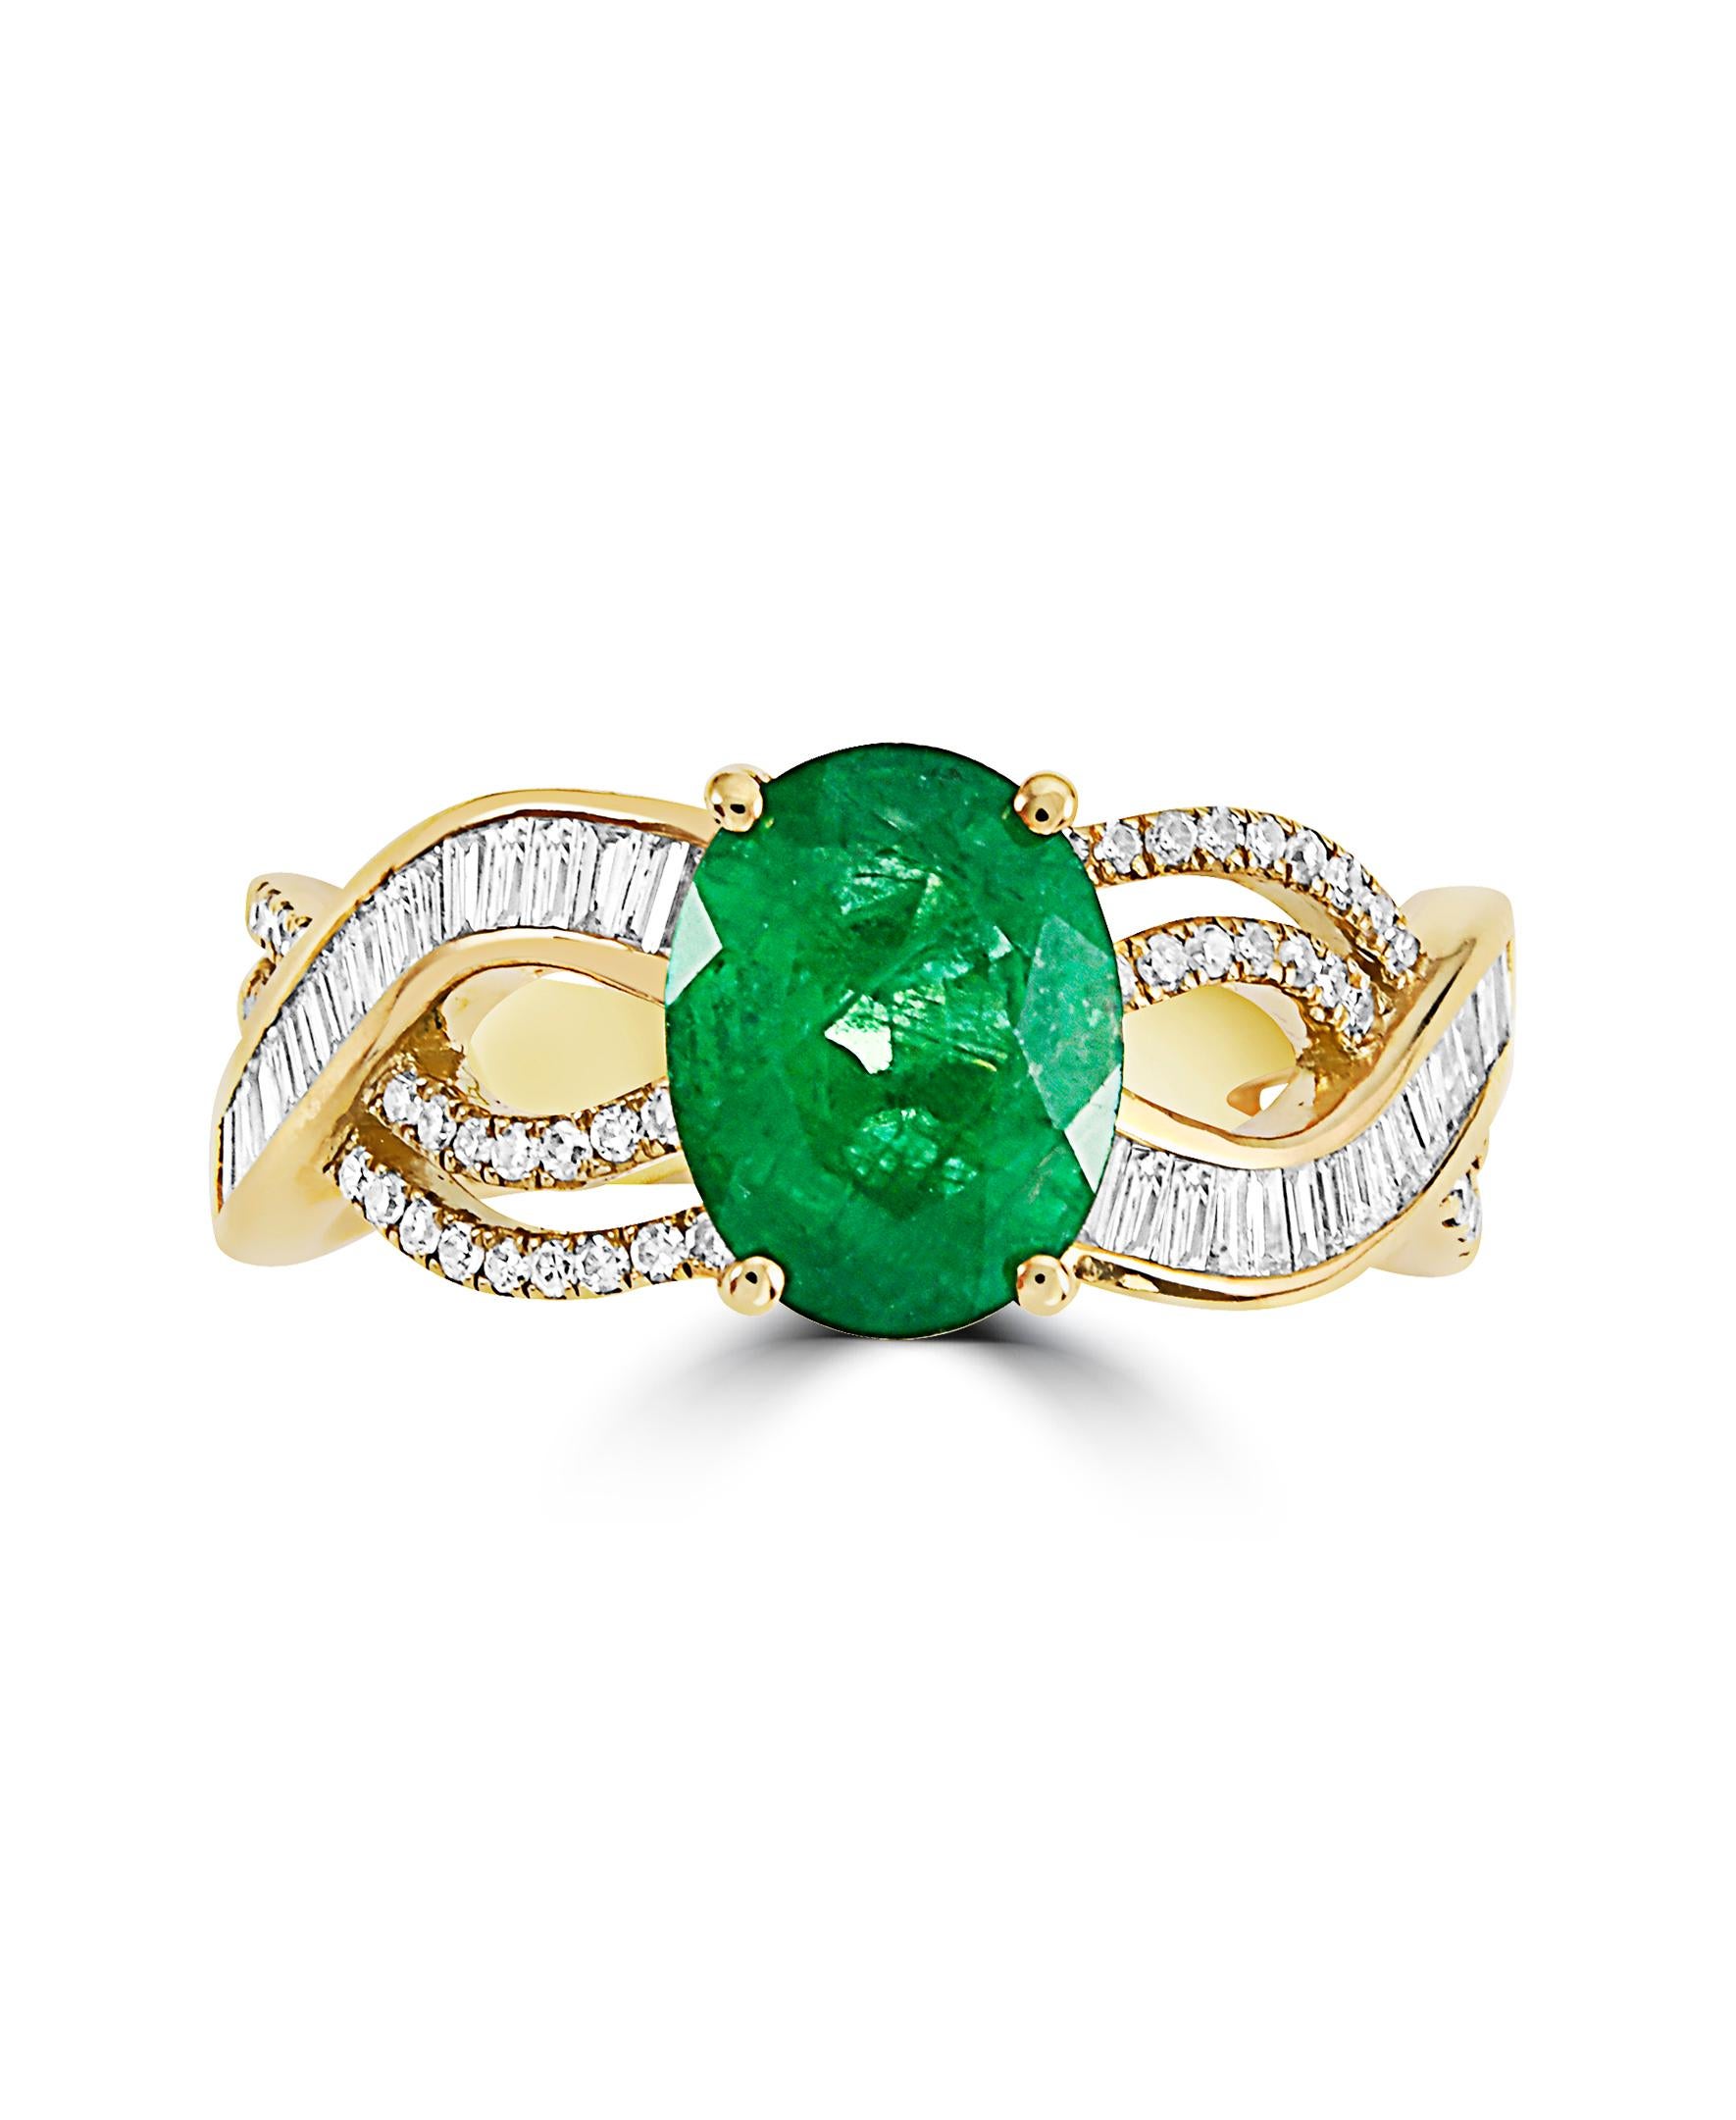 This Effy design ring is set in 14K white and yellow gold. The center stone is an oval shape Emerald and the weight is 1.52ct..
The diamonds are baguette an round in shape and their total weight is 0.49 ct.

This ring is a sizable 7. 

The item